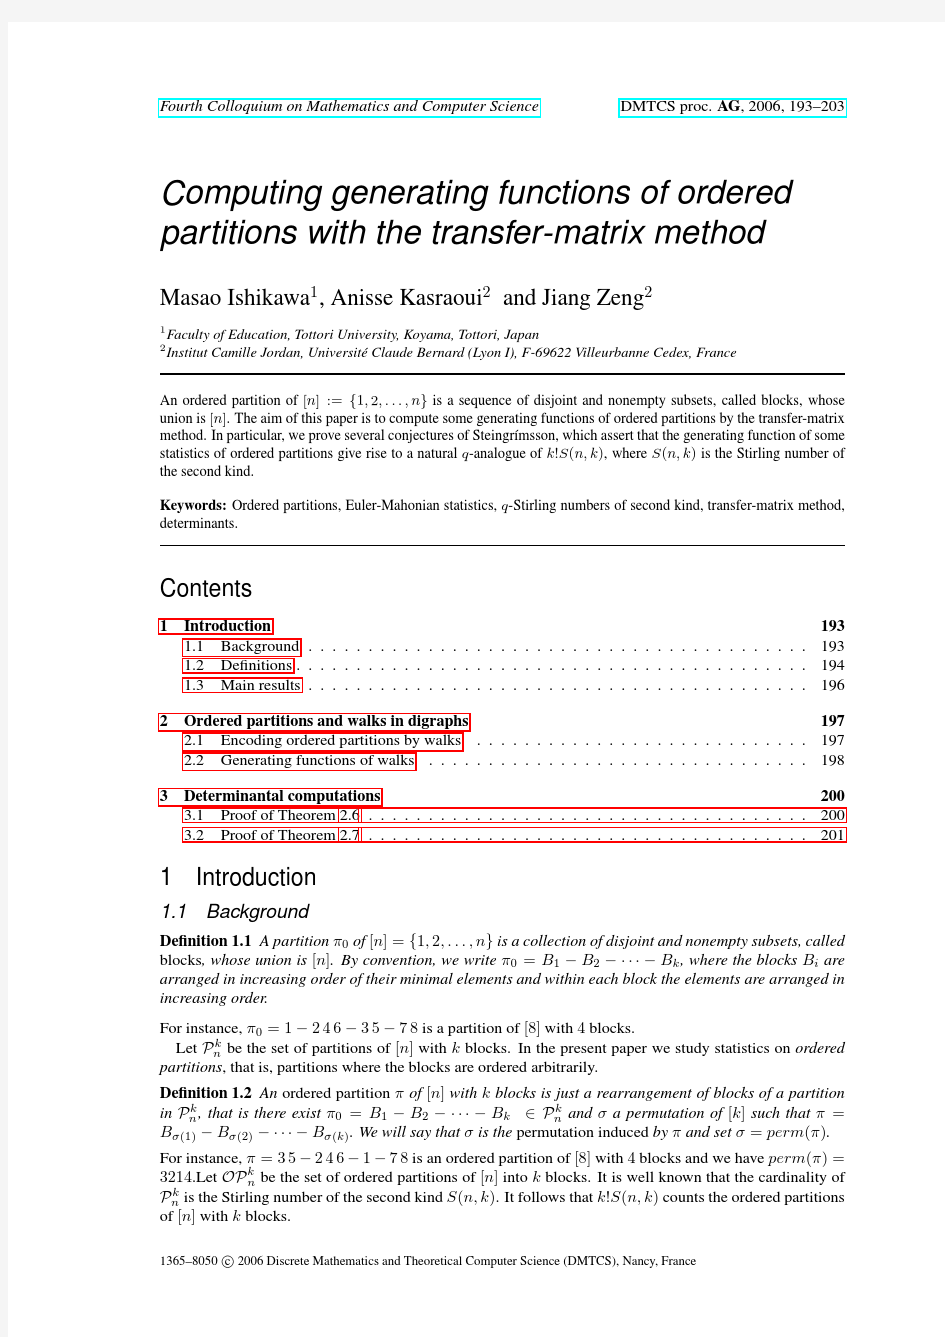 Computing generating functions of ordered partitions with the transfer-matrix method